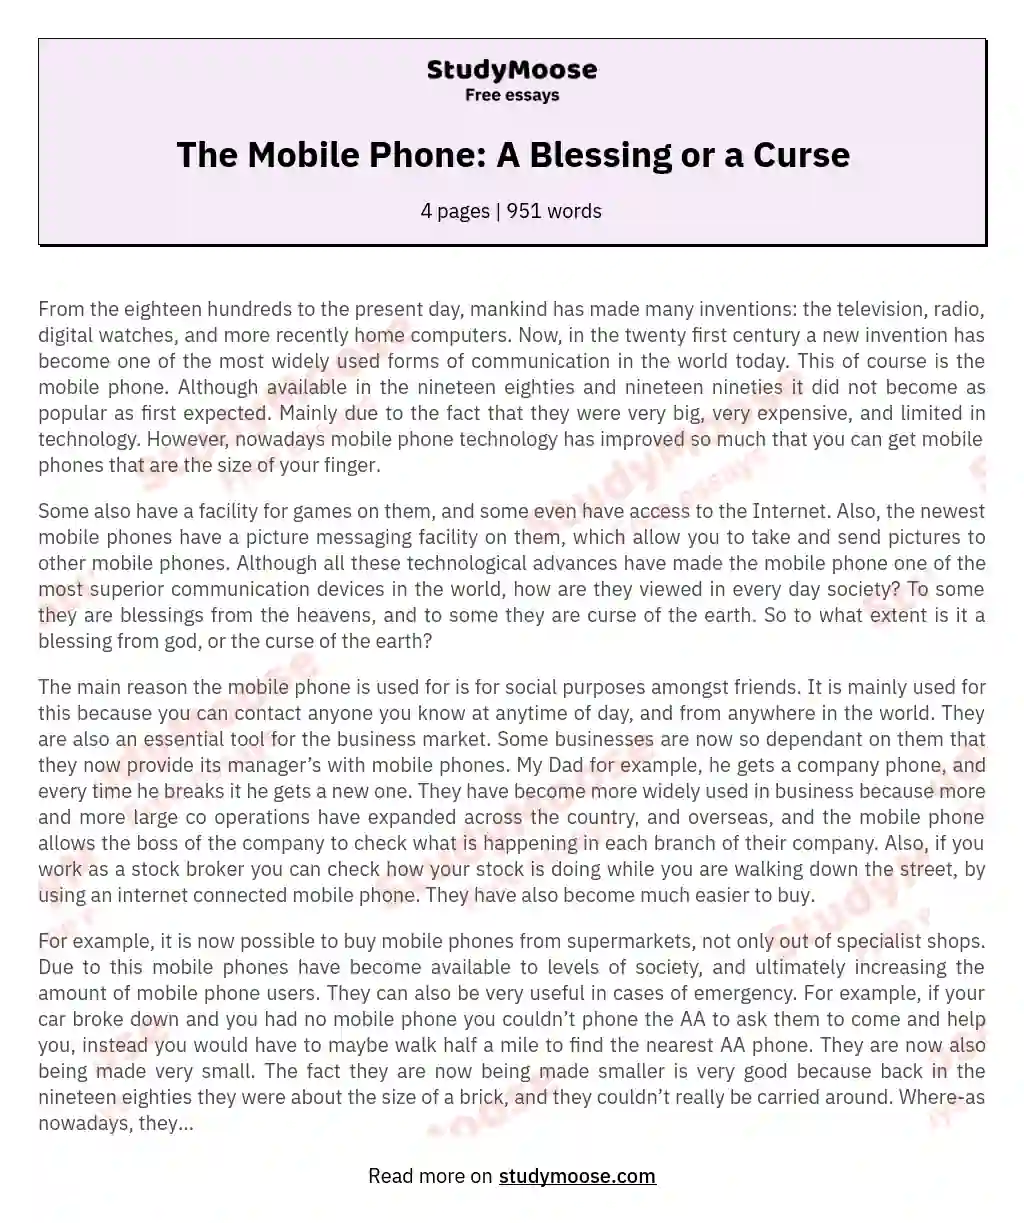 The Mobile Phone: A Blessing or a Curse essay